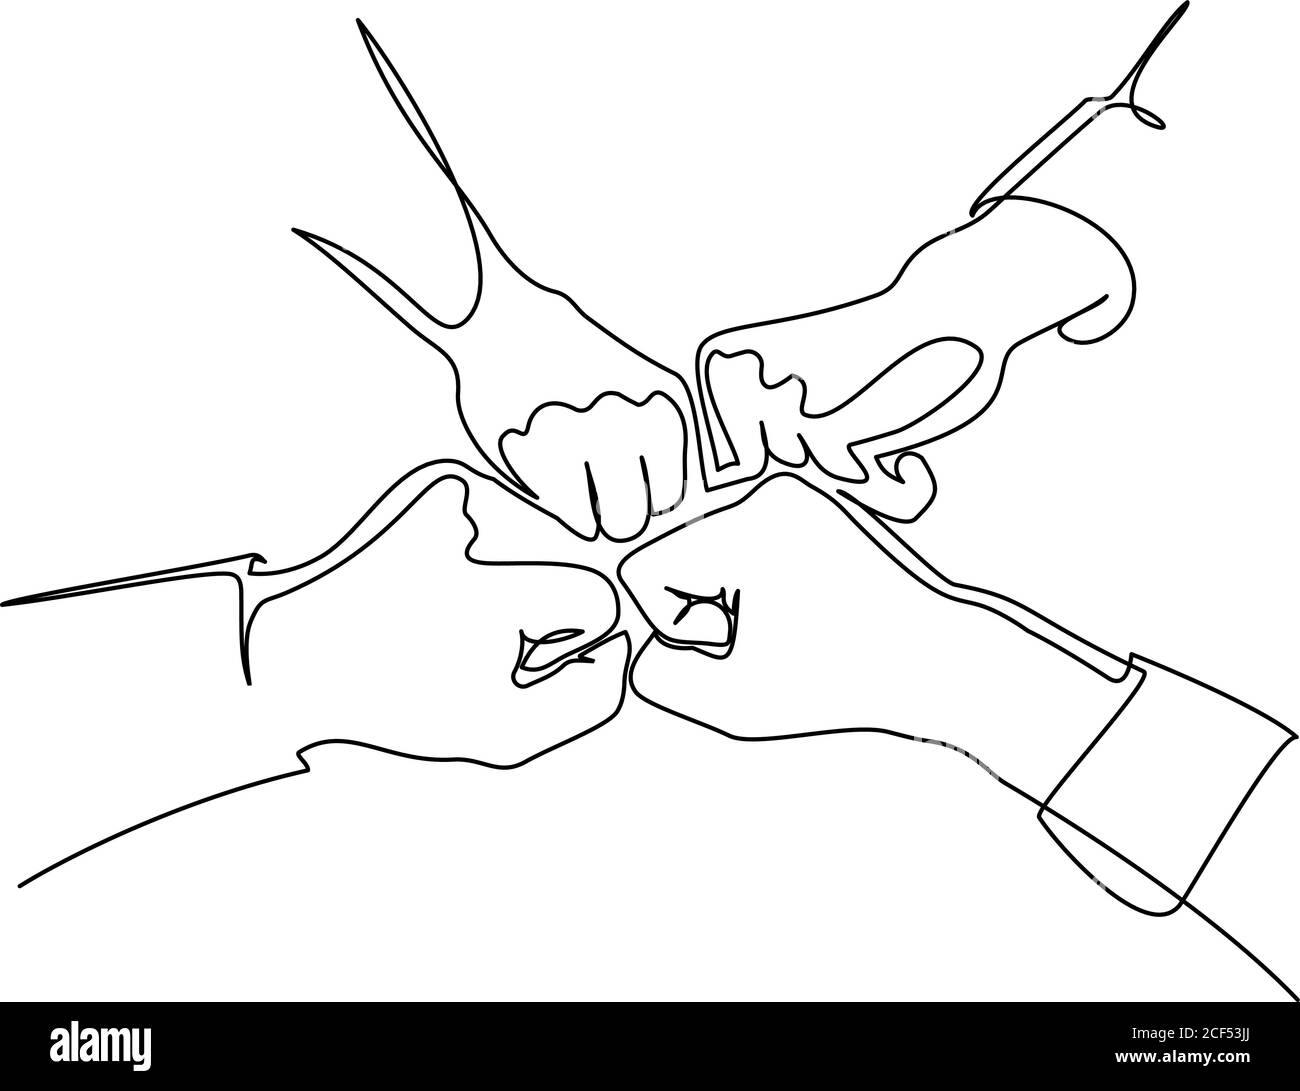 Hands of friends team bumping fists together. Continuous one line drawing. Illustration black isolated on white background. Stock Vector